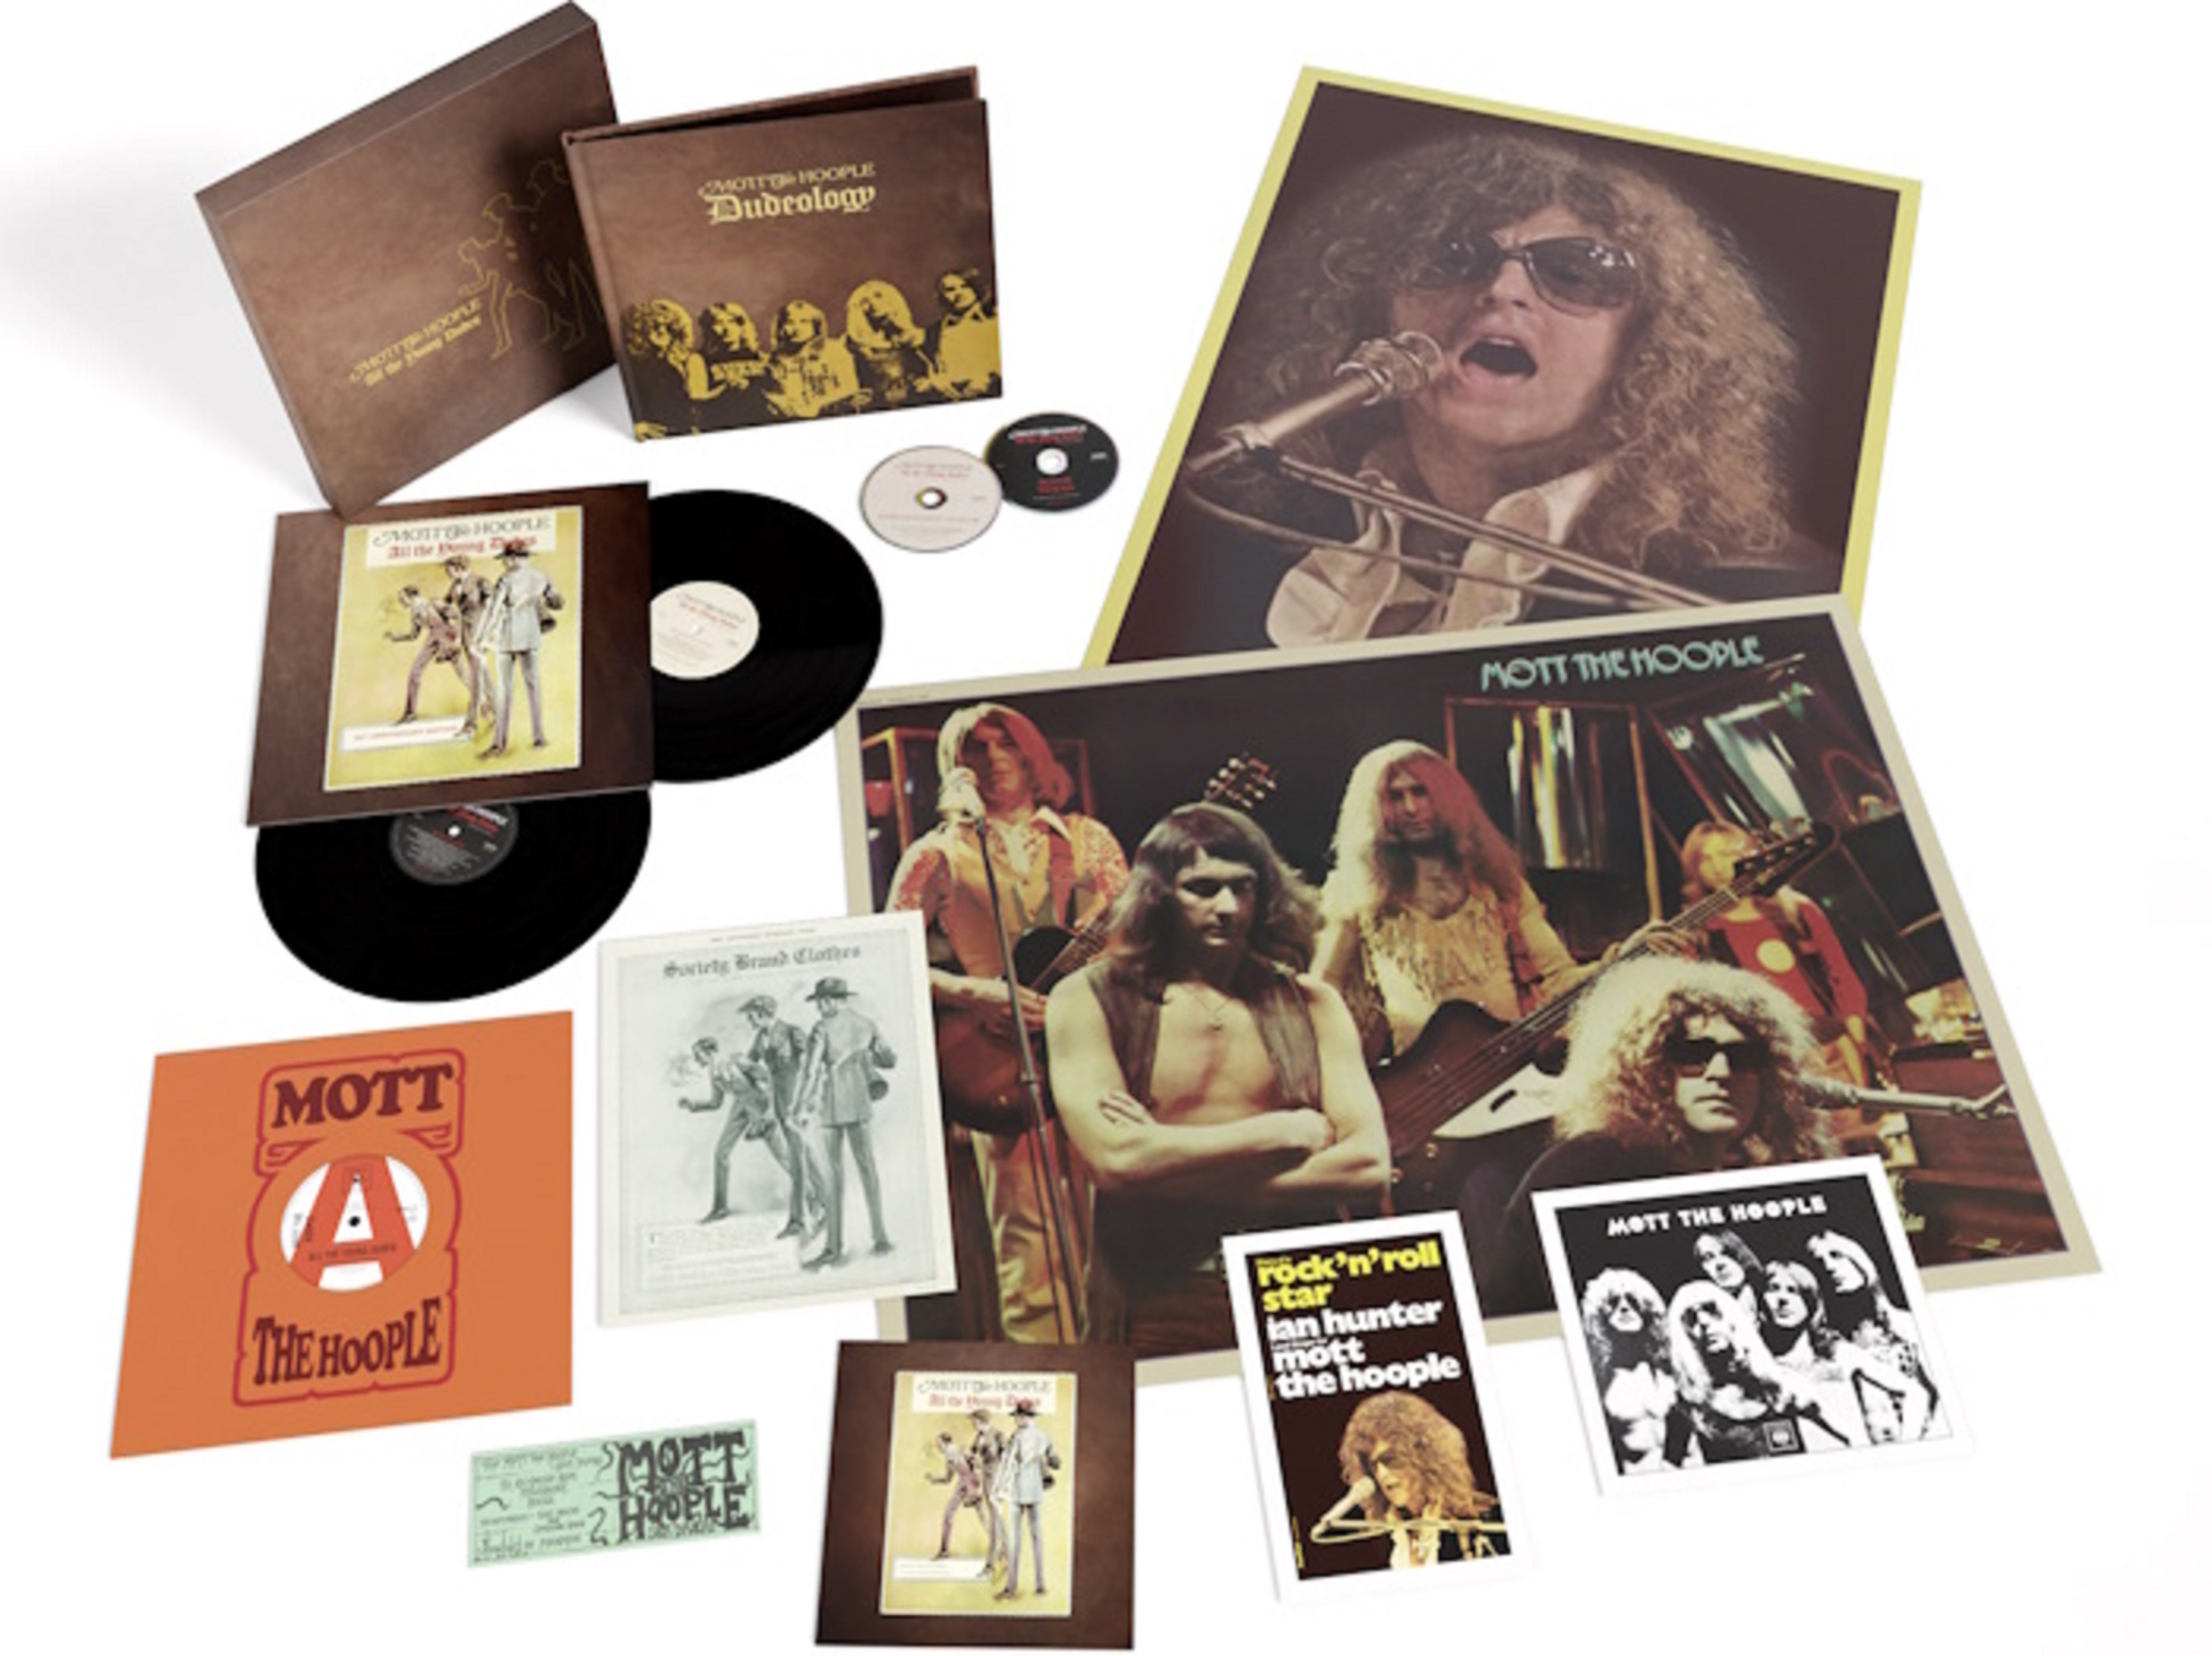 Mott The Hoople “All The Young Dudes” 50th Anniversary Edition Boxset With Newly Remastered Audio Out December 8th